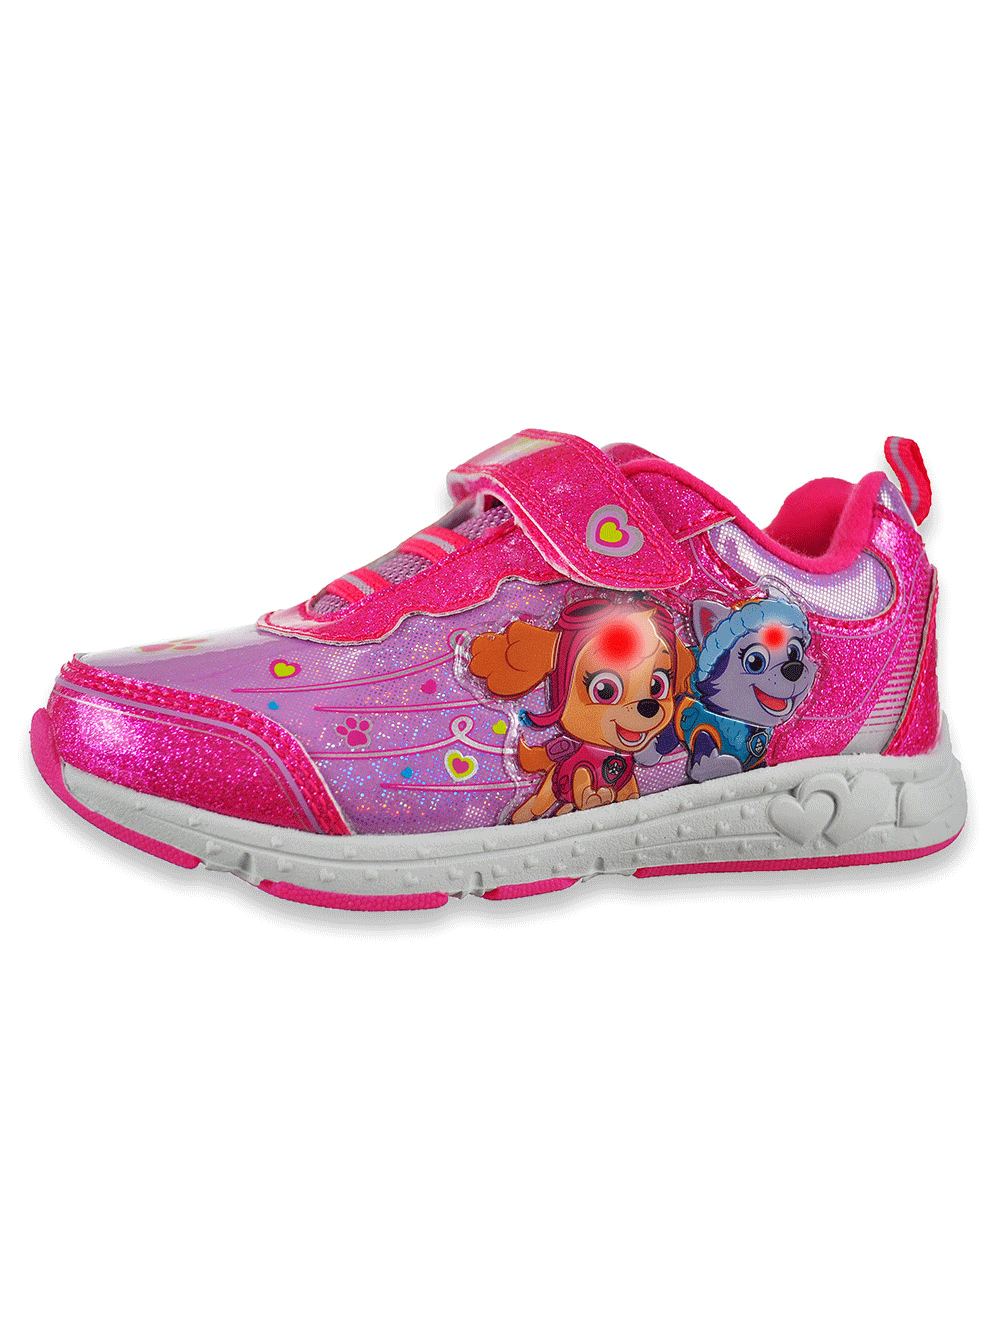 paw patrol pink light up shoes